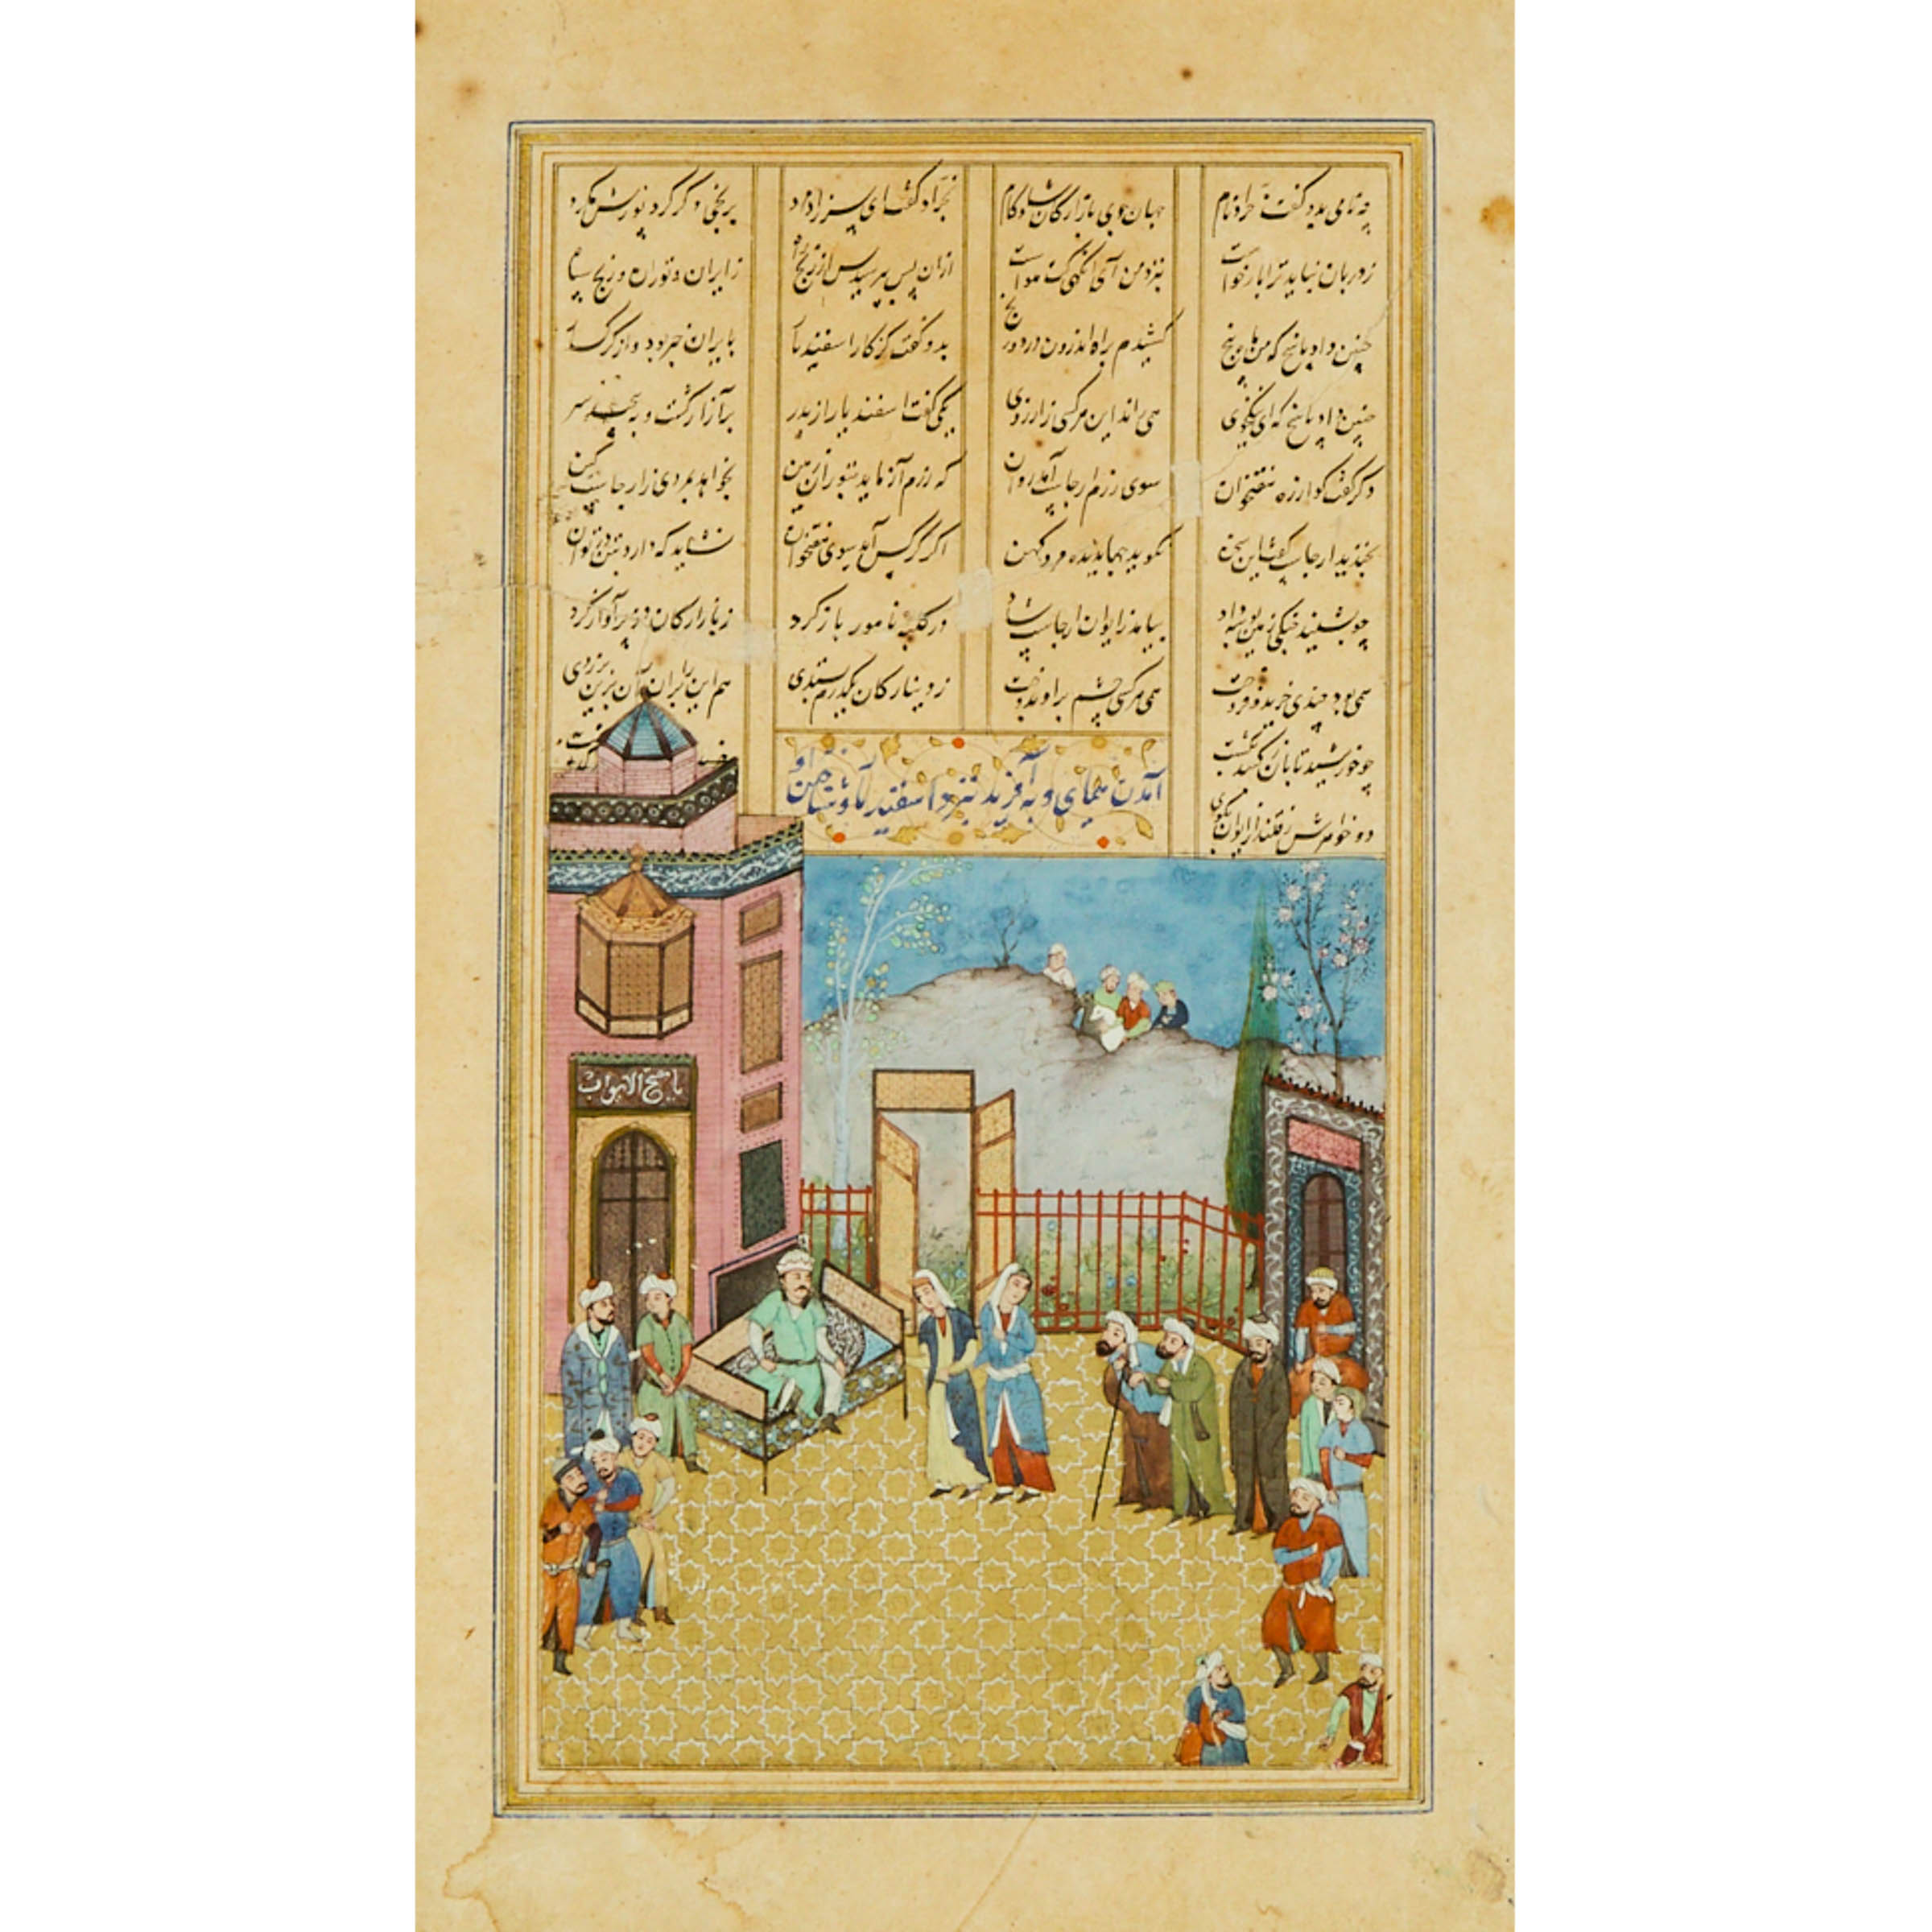 An Indian Miniature Painting, Together With a Persian Double-Sided Manuscript and Two Persian Textiles, 19th Century